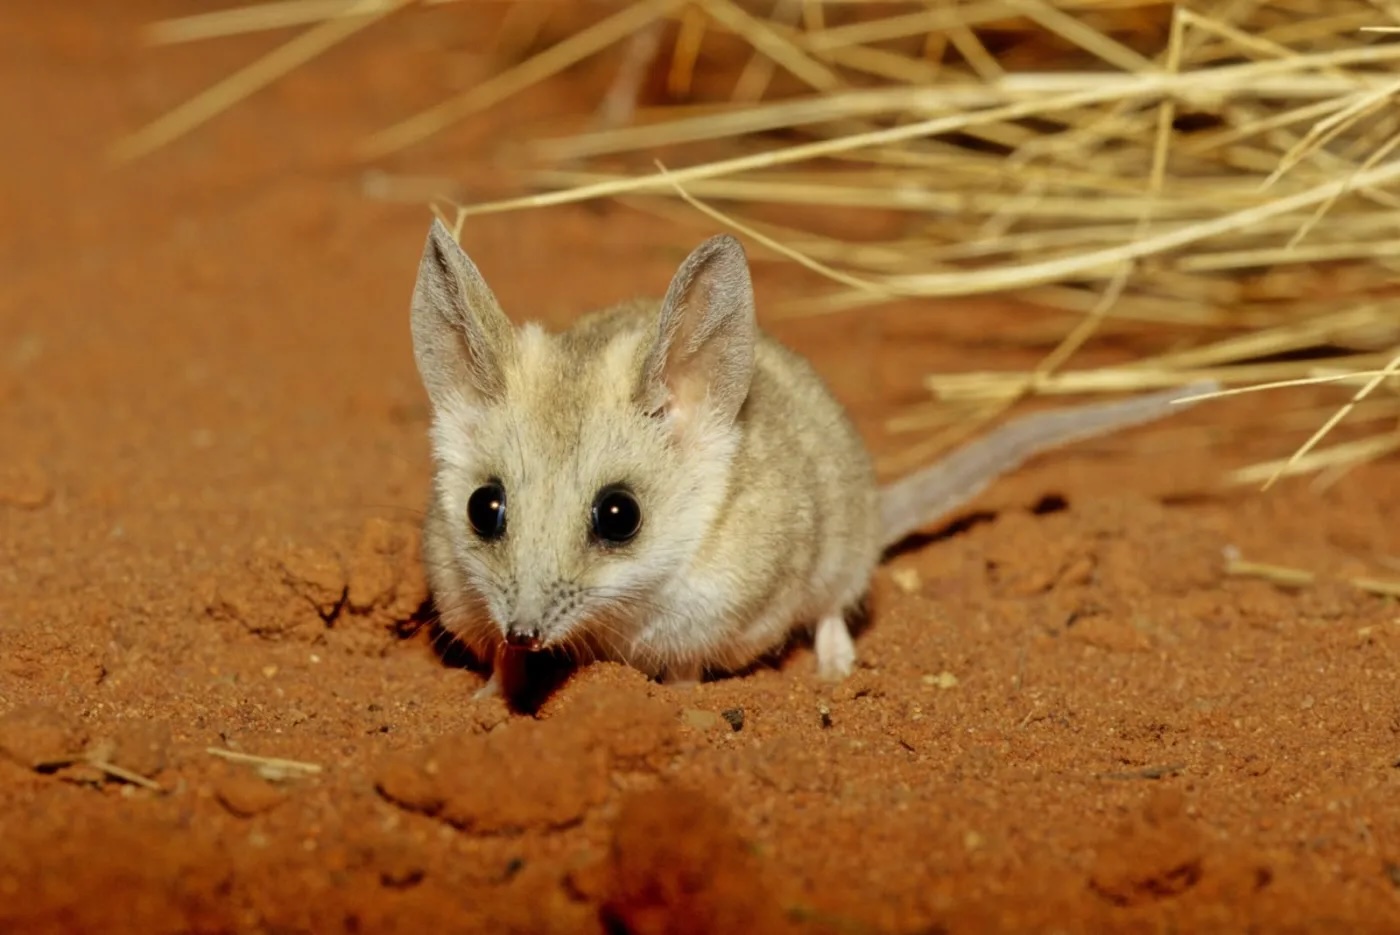 A small mouse is standing in the dirt.